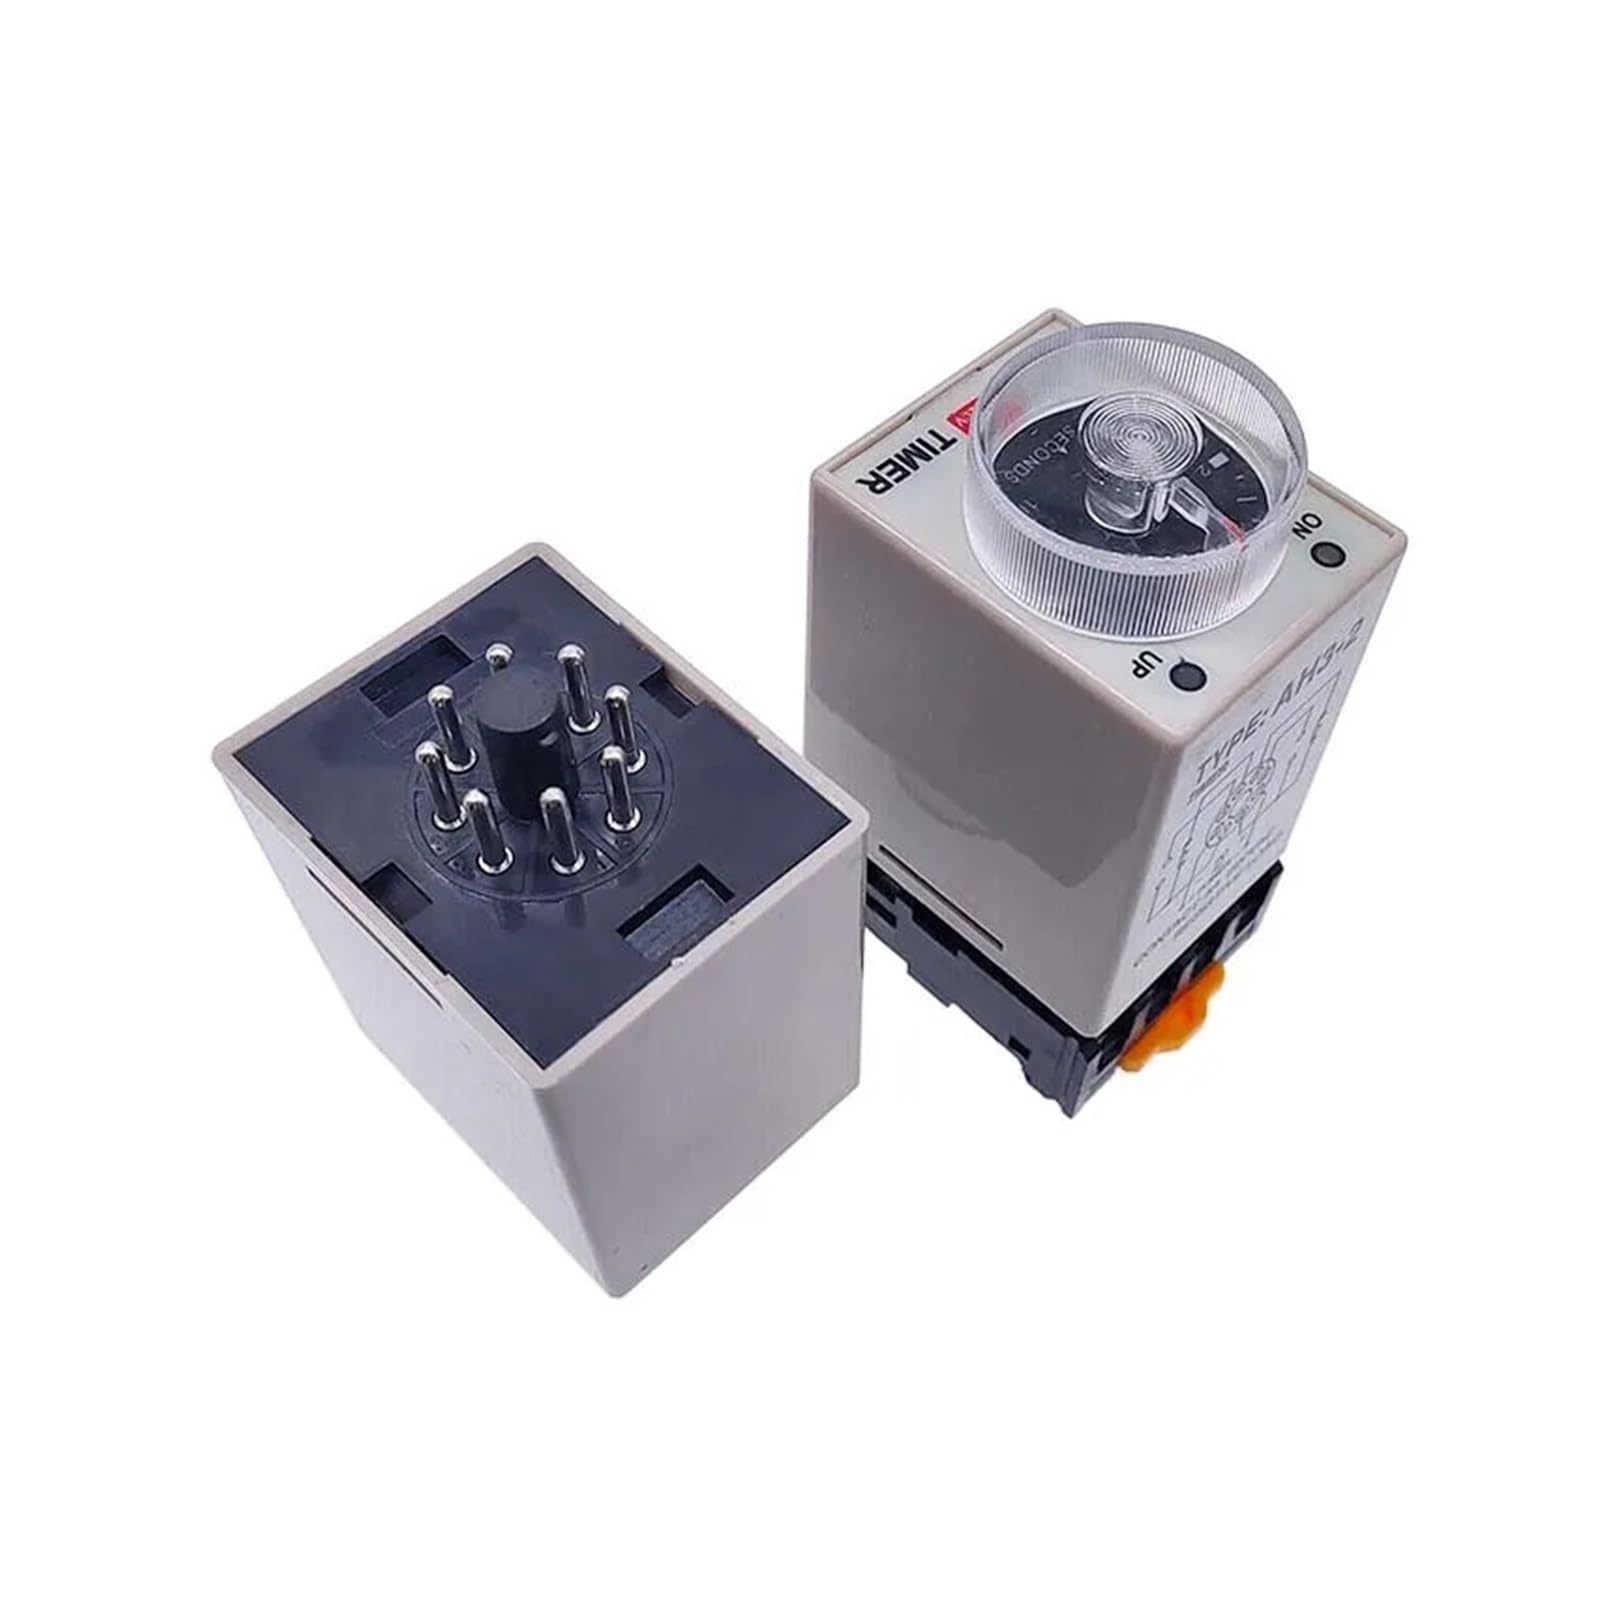 1 PC AH3-2 Power-on Delay Timer AH3-3 Time Relay AC Thick Stitch Time Set Range 1S/5S/10S/30S/60S/5M/10M/30M LABDIP(AC110V,AH3-2 0-3Minutes) von LABDIP